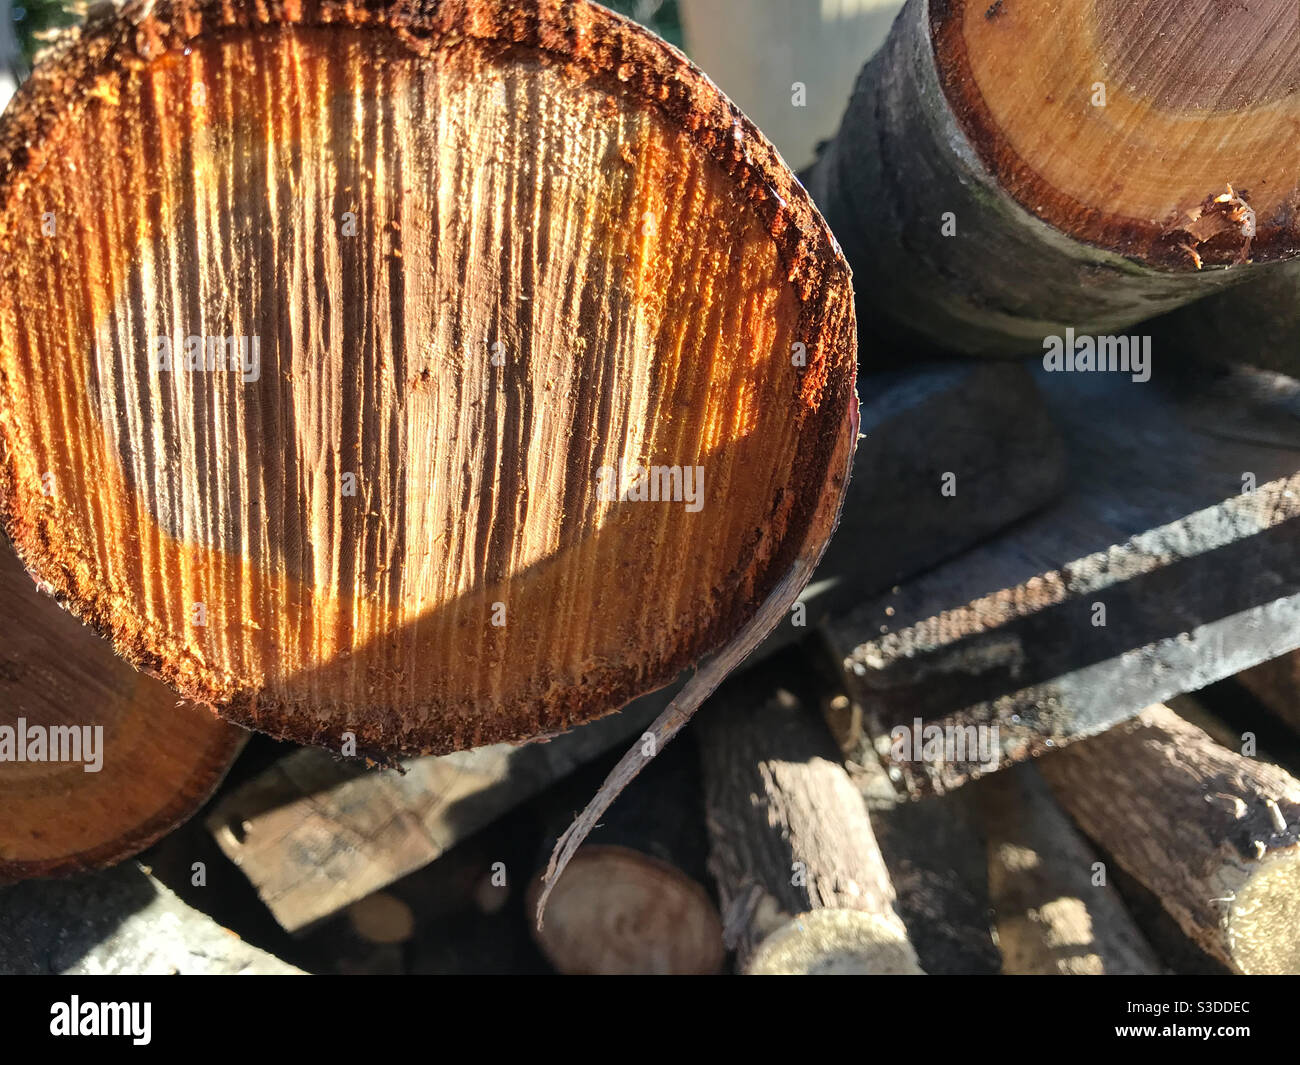 Close view of logs in wood pile Stock Photo